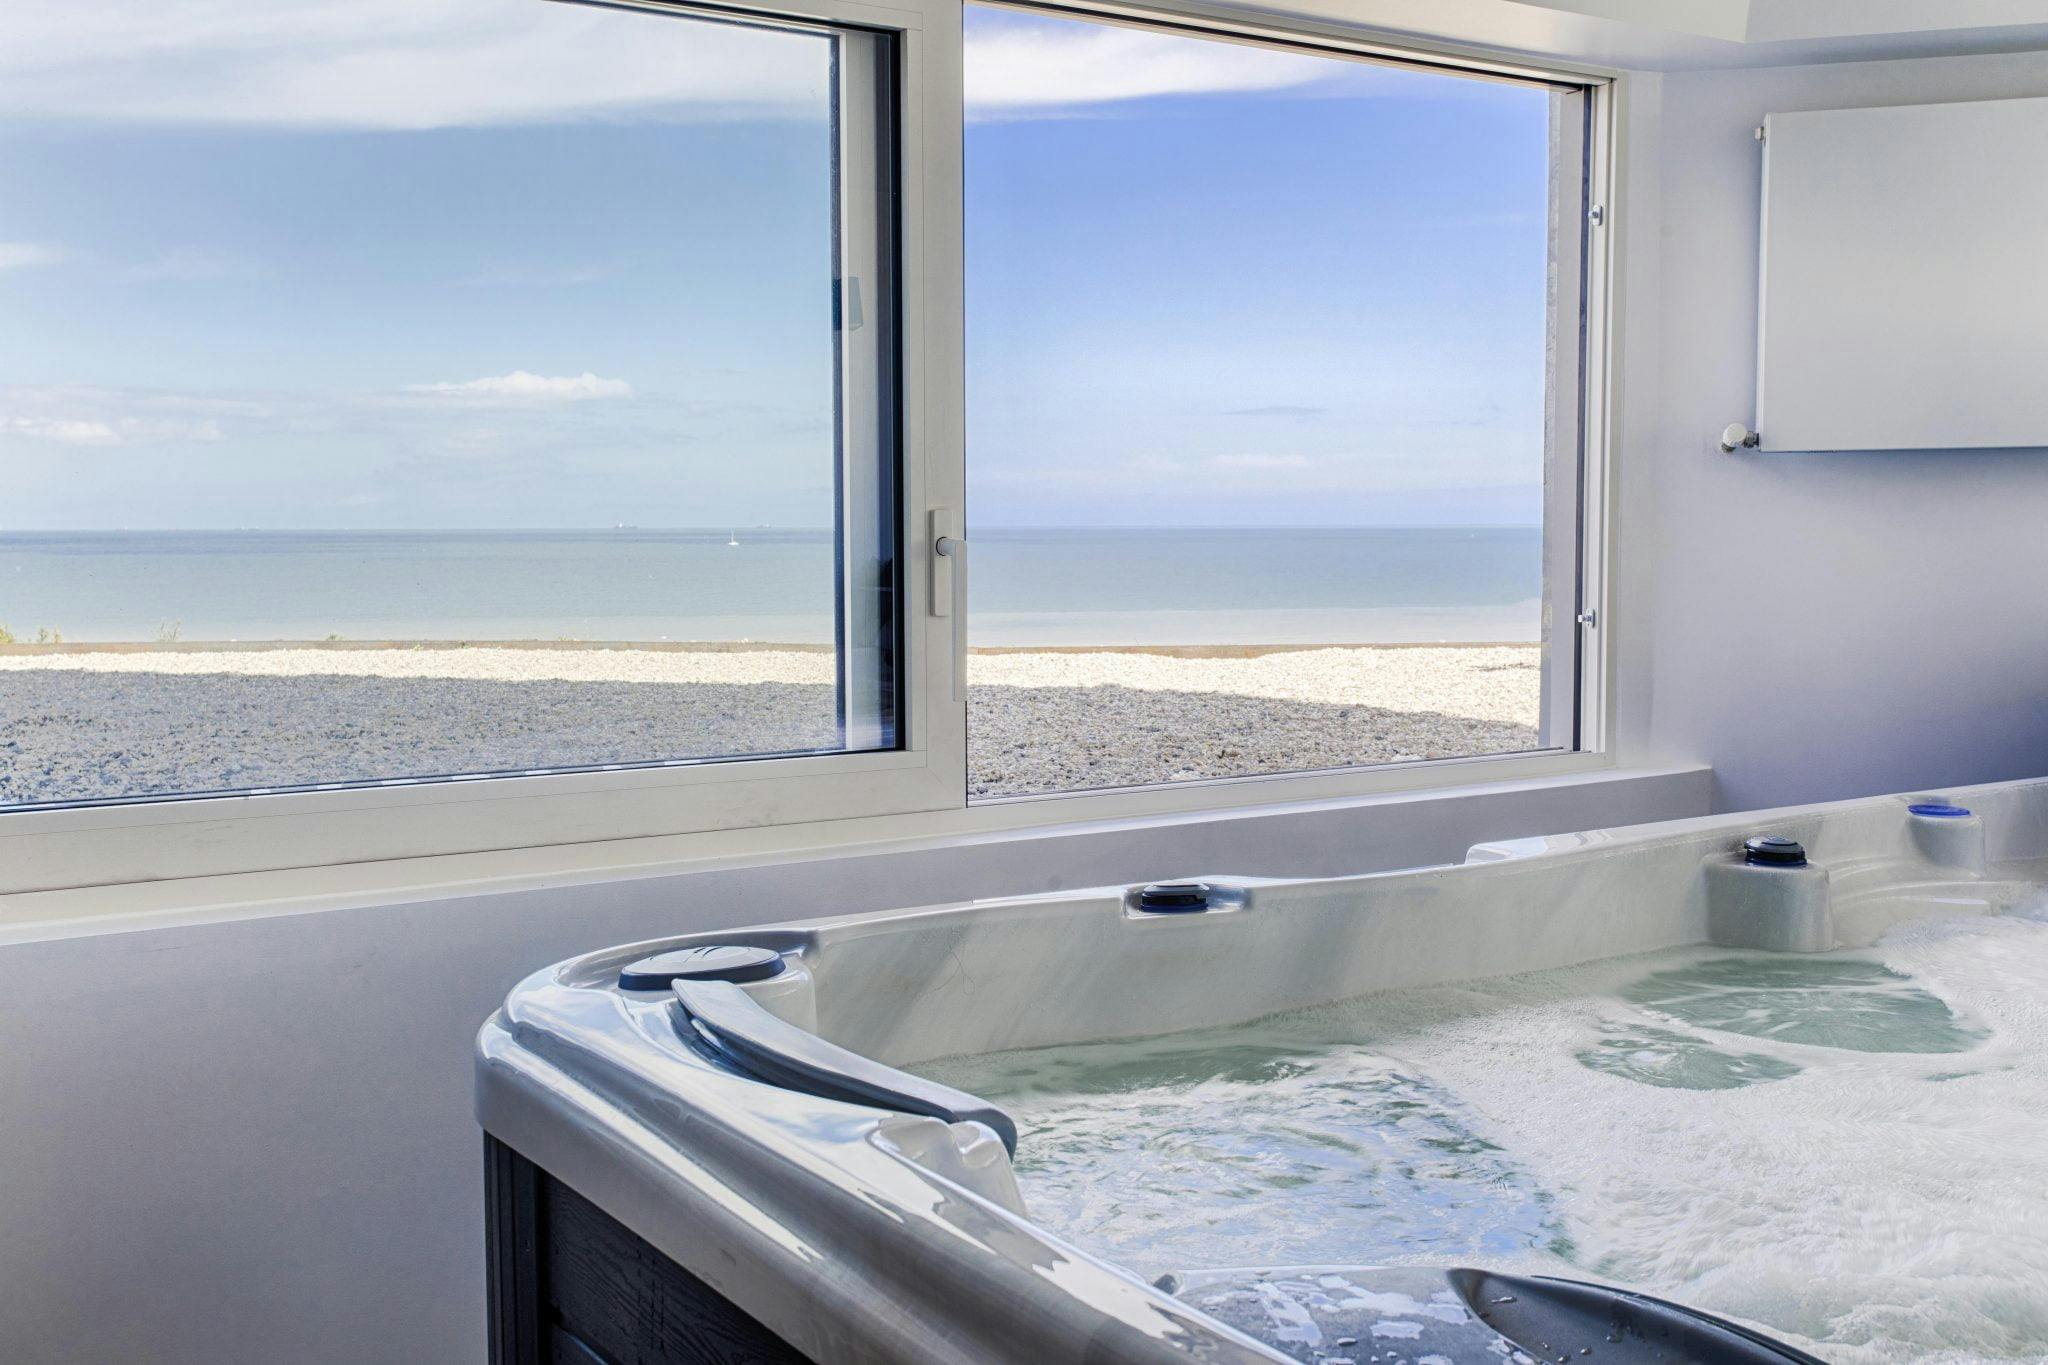 The jacuzzi overlooks an open window and the sea